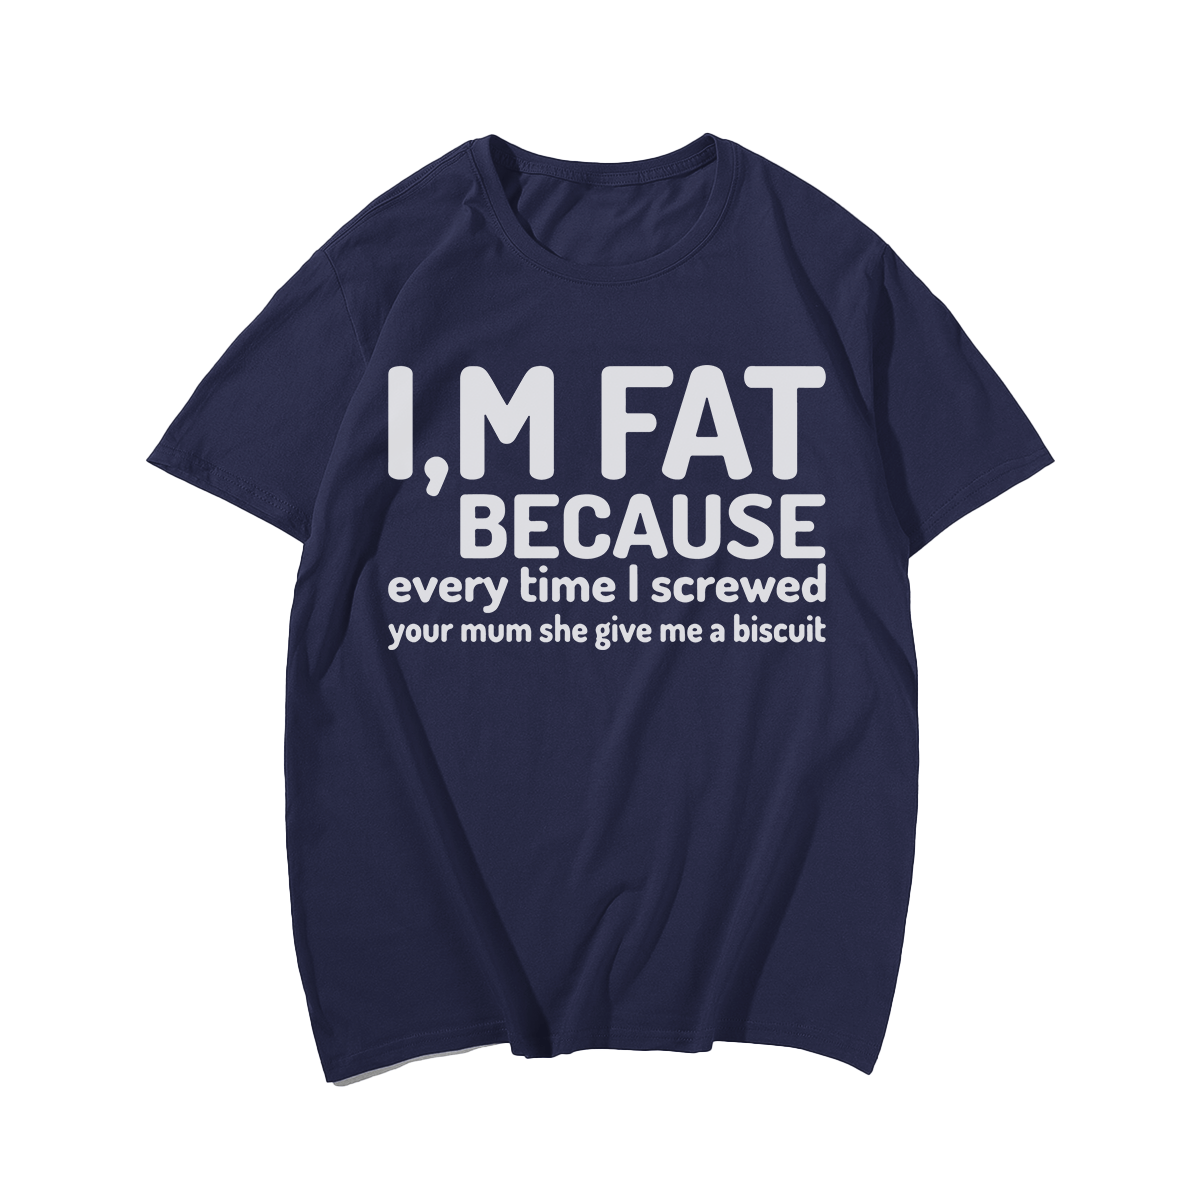 I'm Fat Because T-shirt for Men, Oversize Plus Size Big & Tall Man Clothing